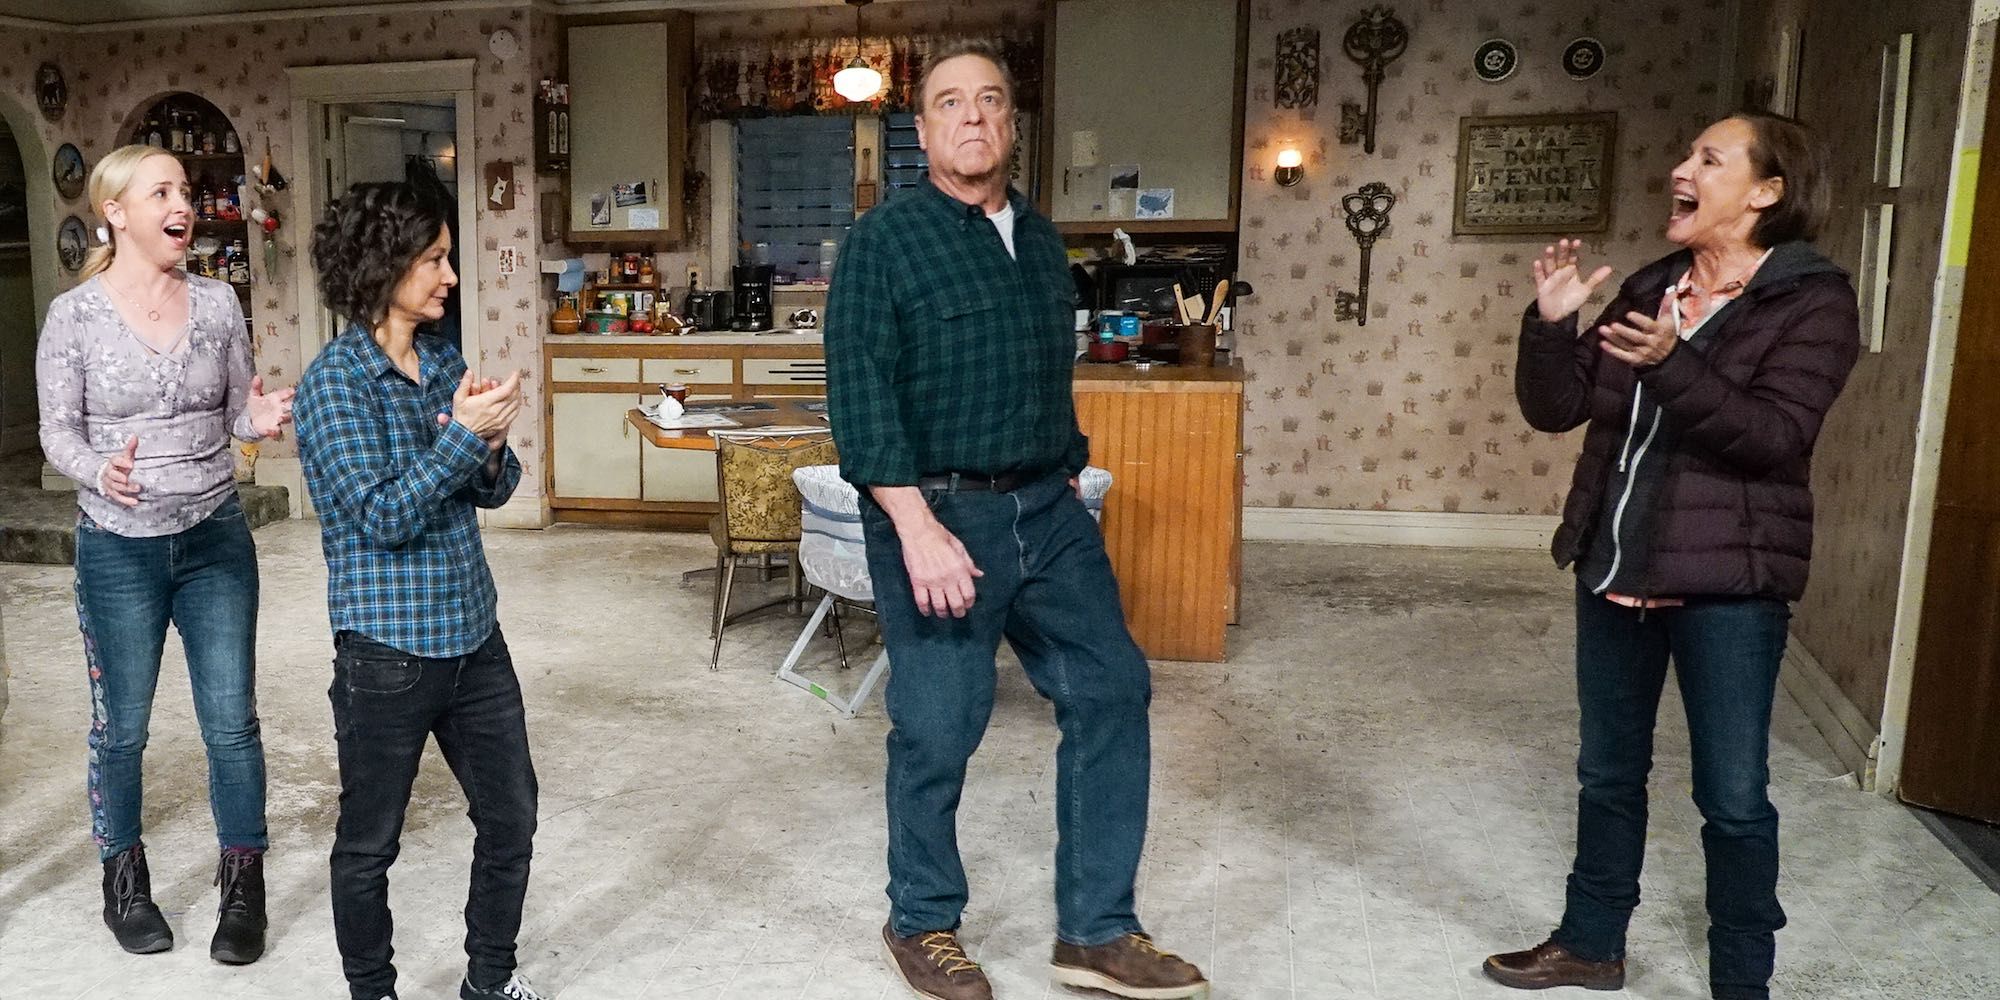 The Conners Season 3 Returns To Filming Without A Live Studio Audience